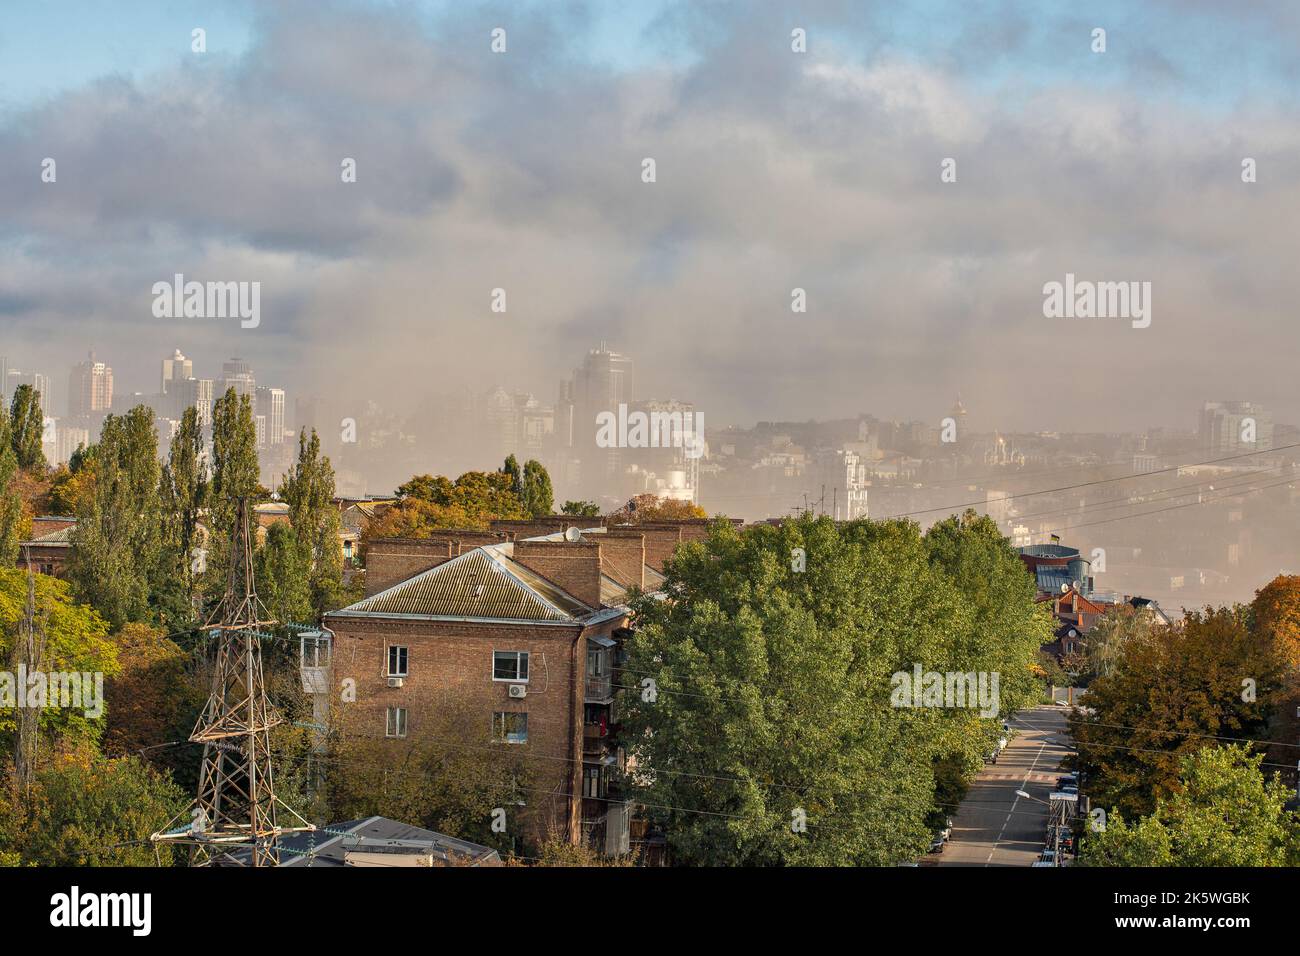 Kyiv, Ukraine on October 10, 2022: Thick smoke from fires rise over the downtown after a Russian missile attack in retaliation for the destruction of the Crimean bridge. War in Ukraine. Credit: Panama/Alamy Live News Stock Photo